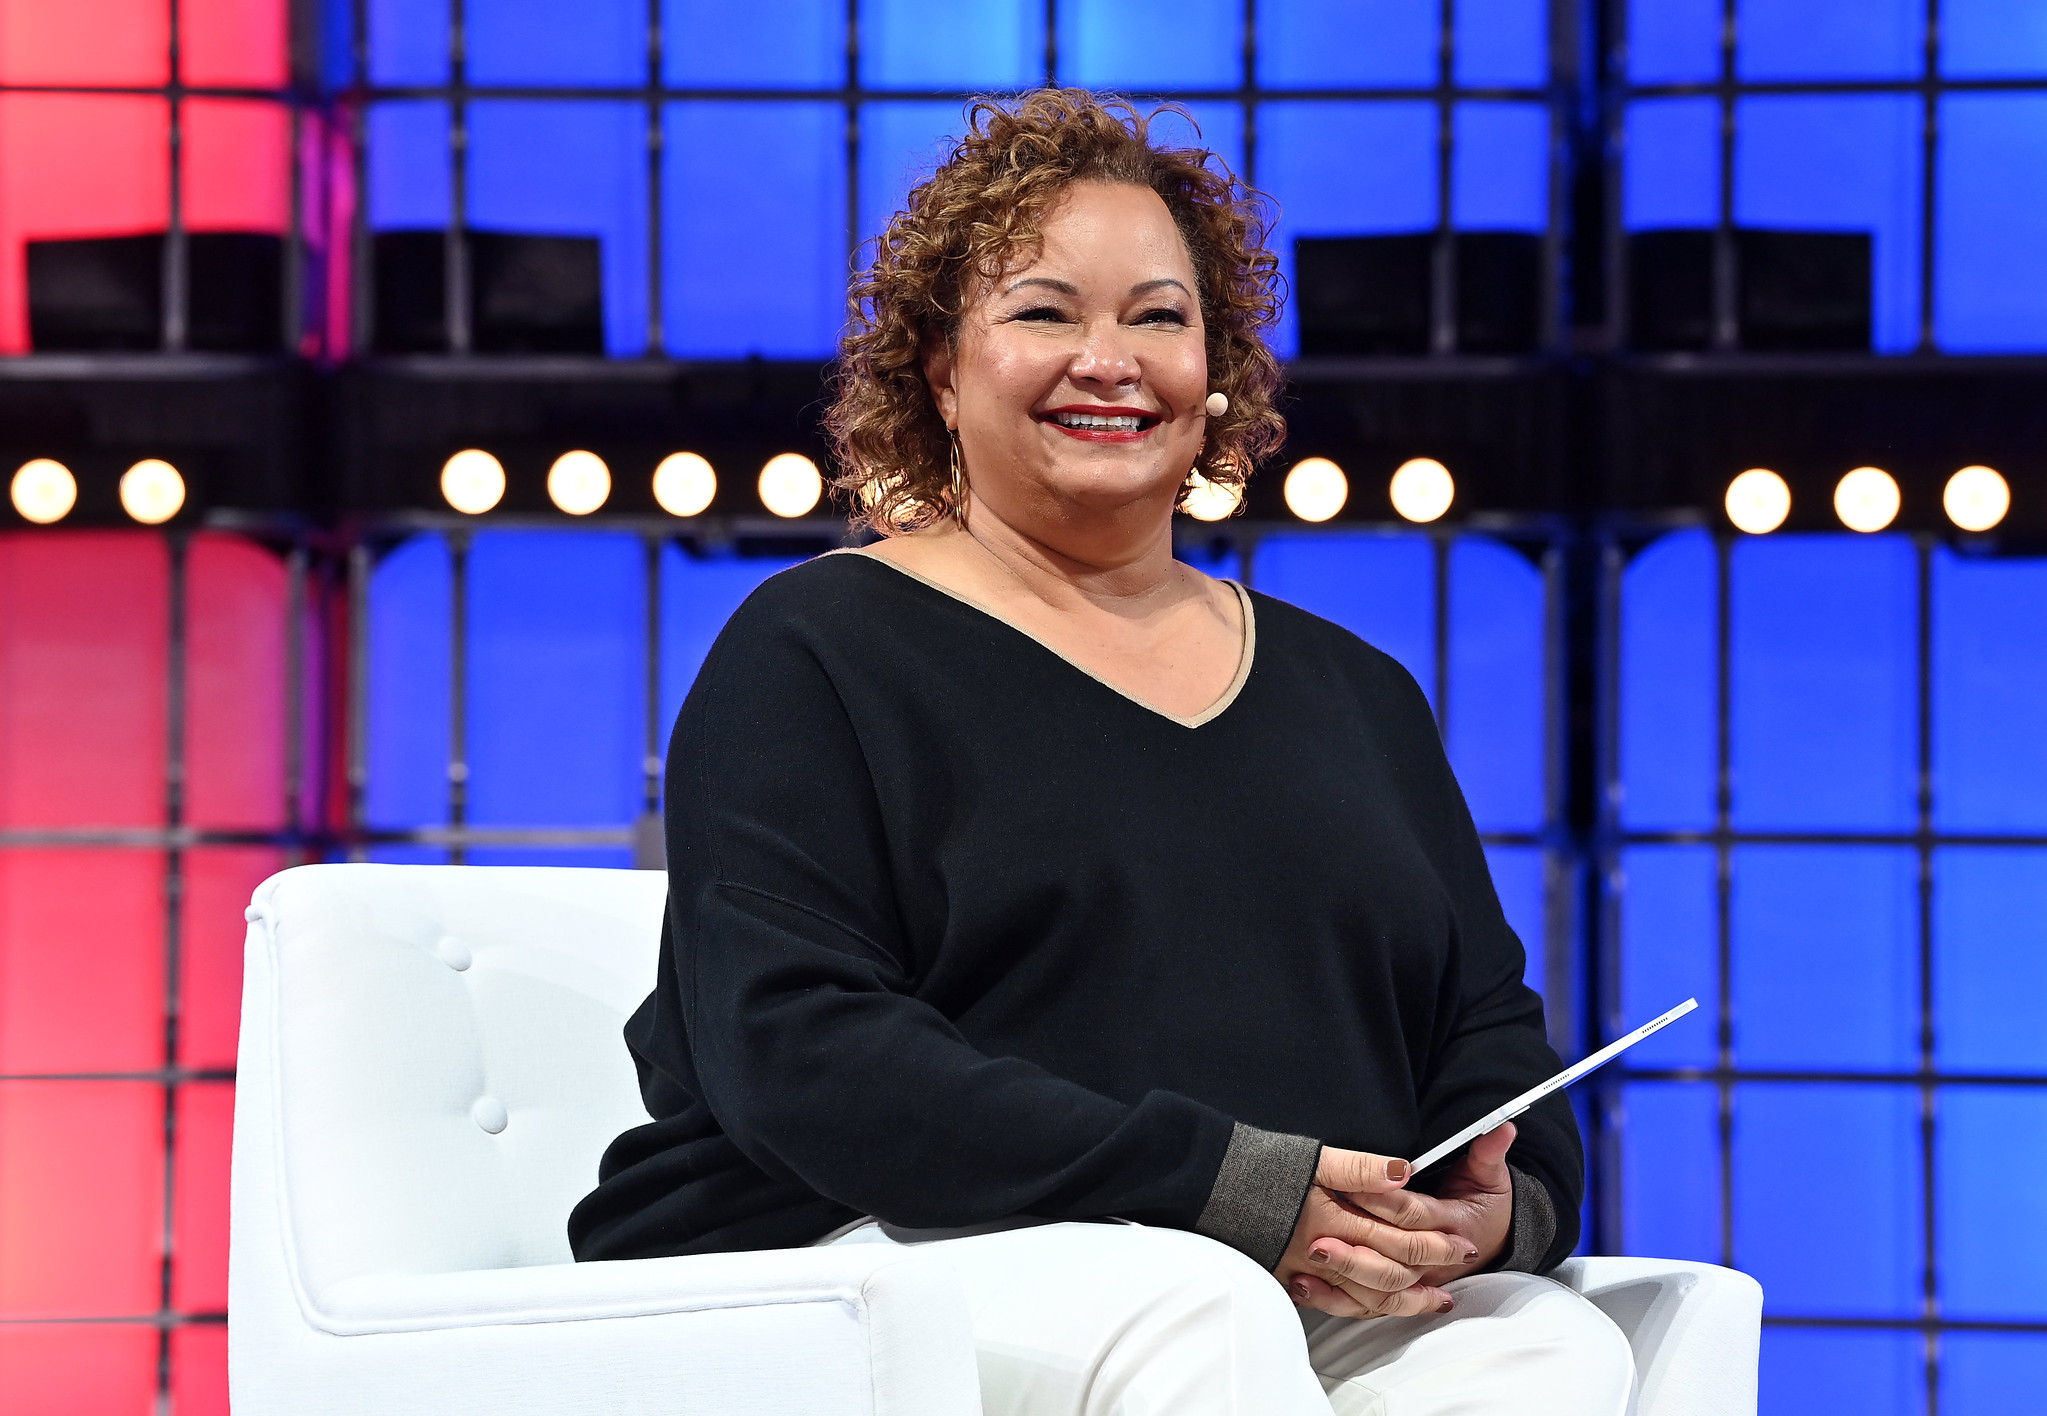 A photograph of Lisa Jackson, VP of environment, policy and social initiatives at Apple, speaking on stage at Web Summit. Lisa is sitting on a chair and appears to be holding a tablet or piece of paper. Lisa is smiling, and is wearing an on-ear microphone.